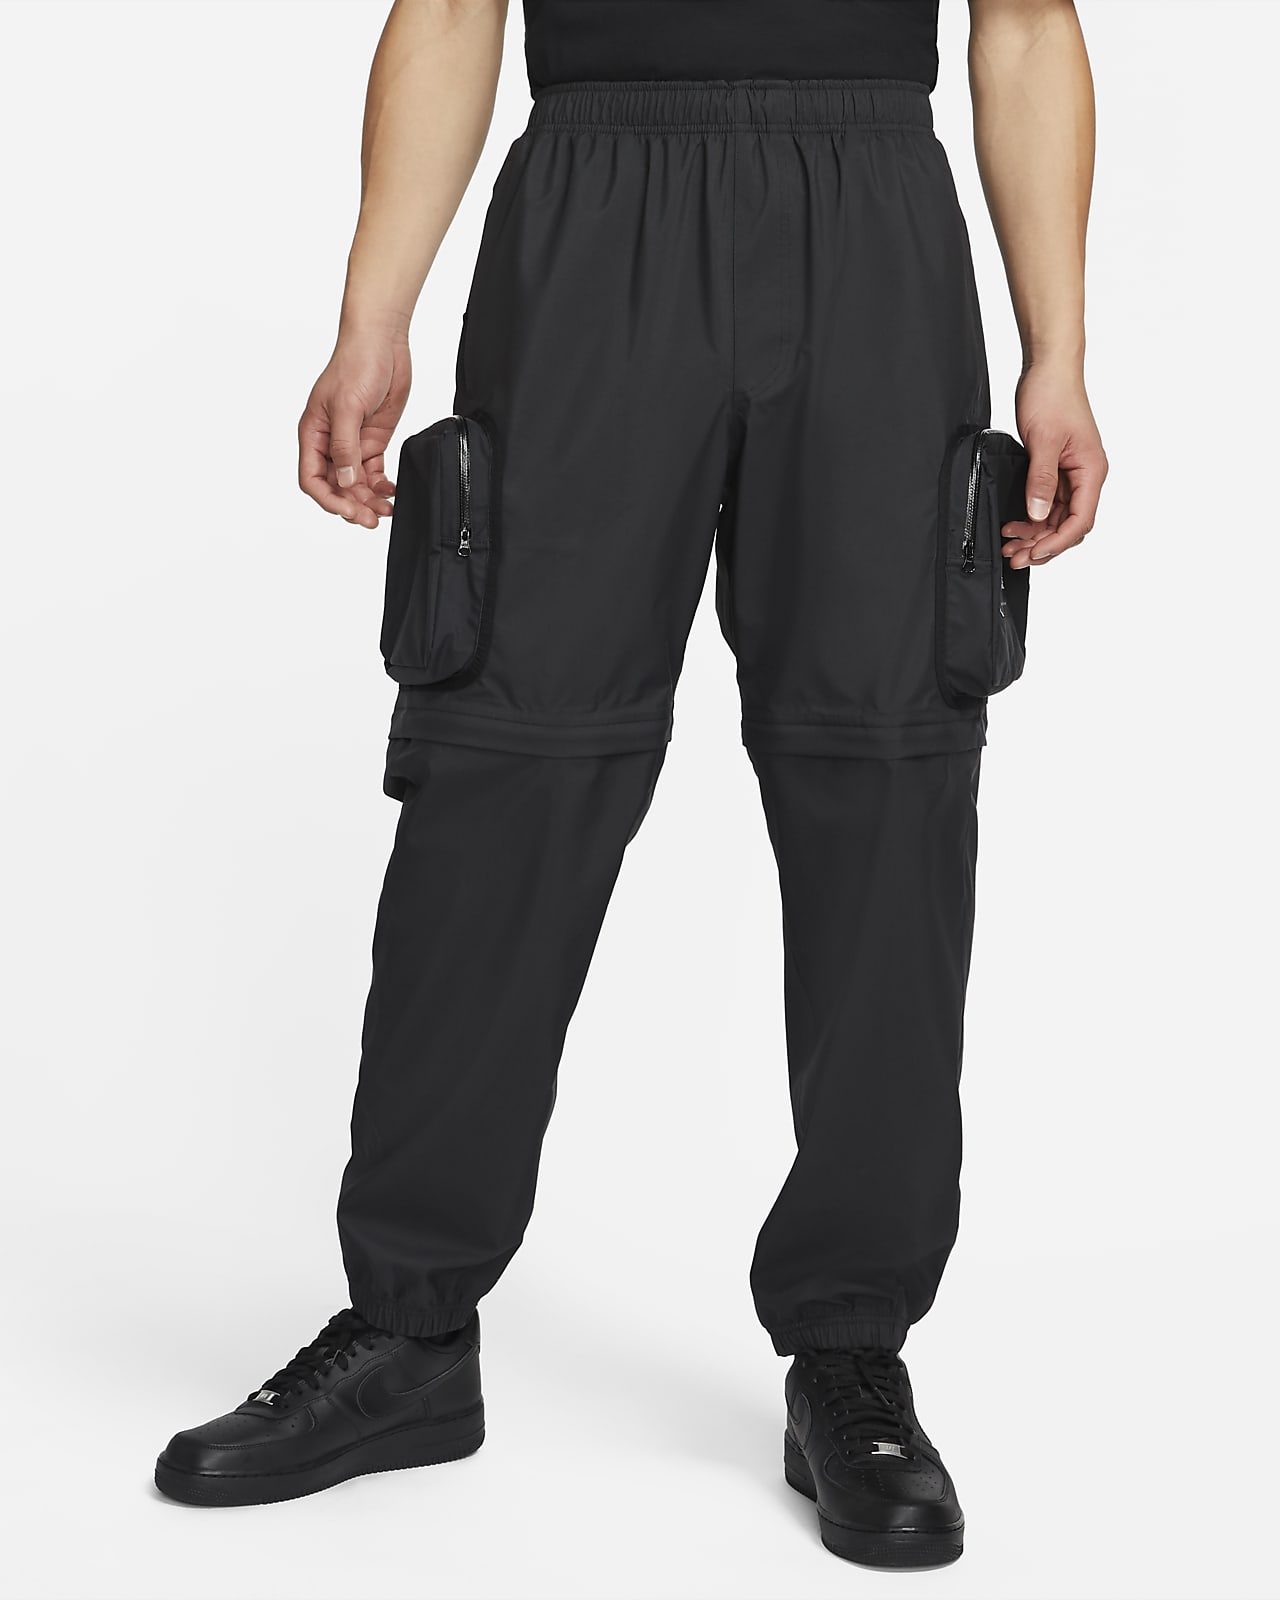 undercover nike pants